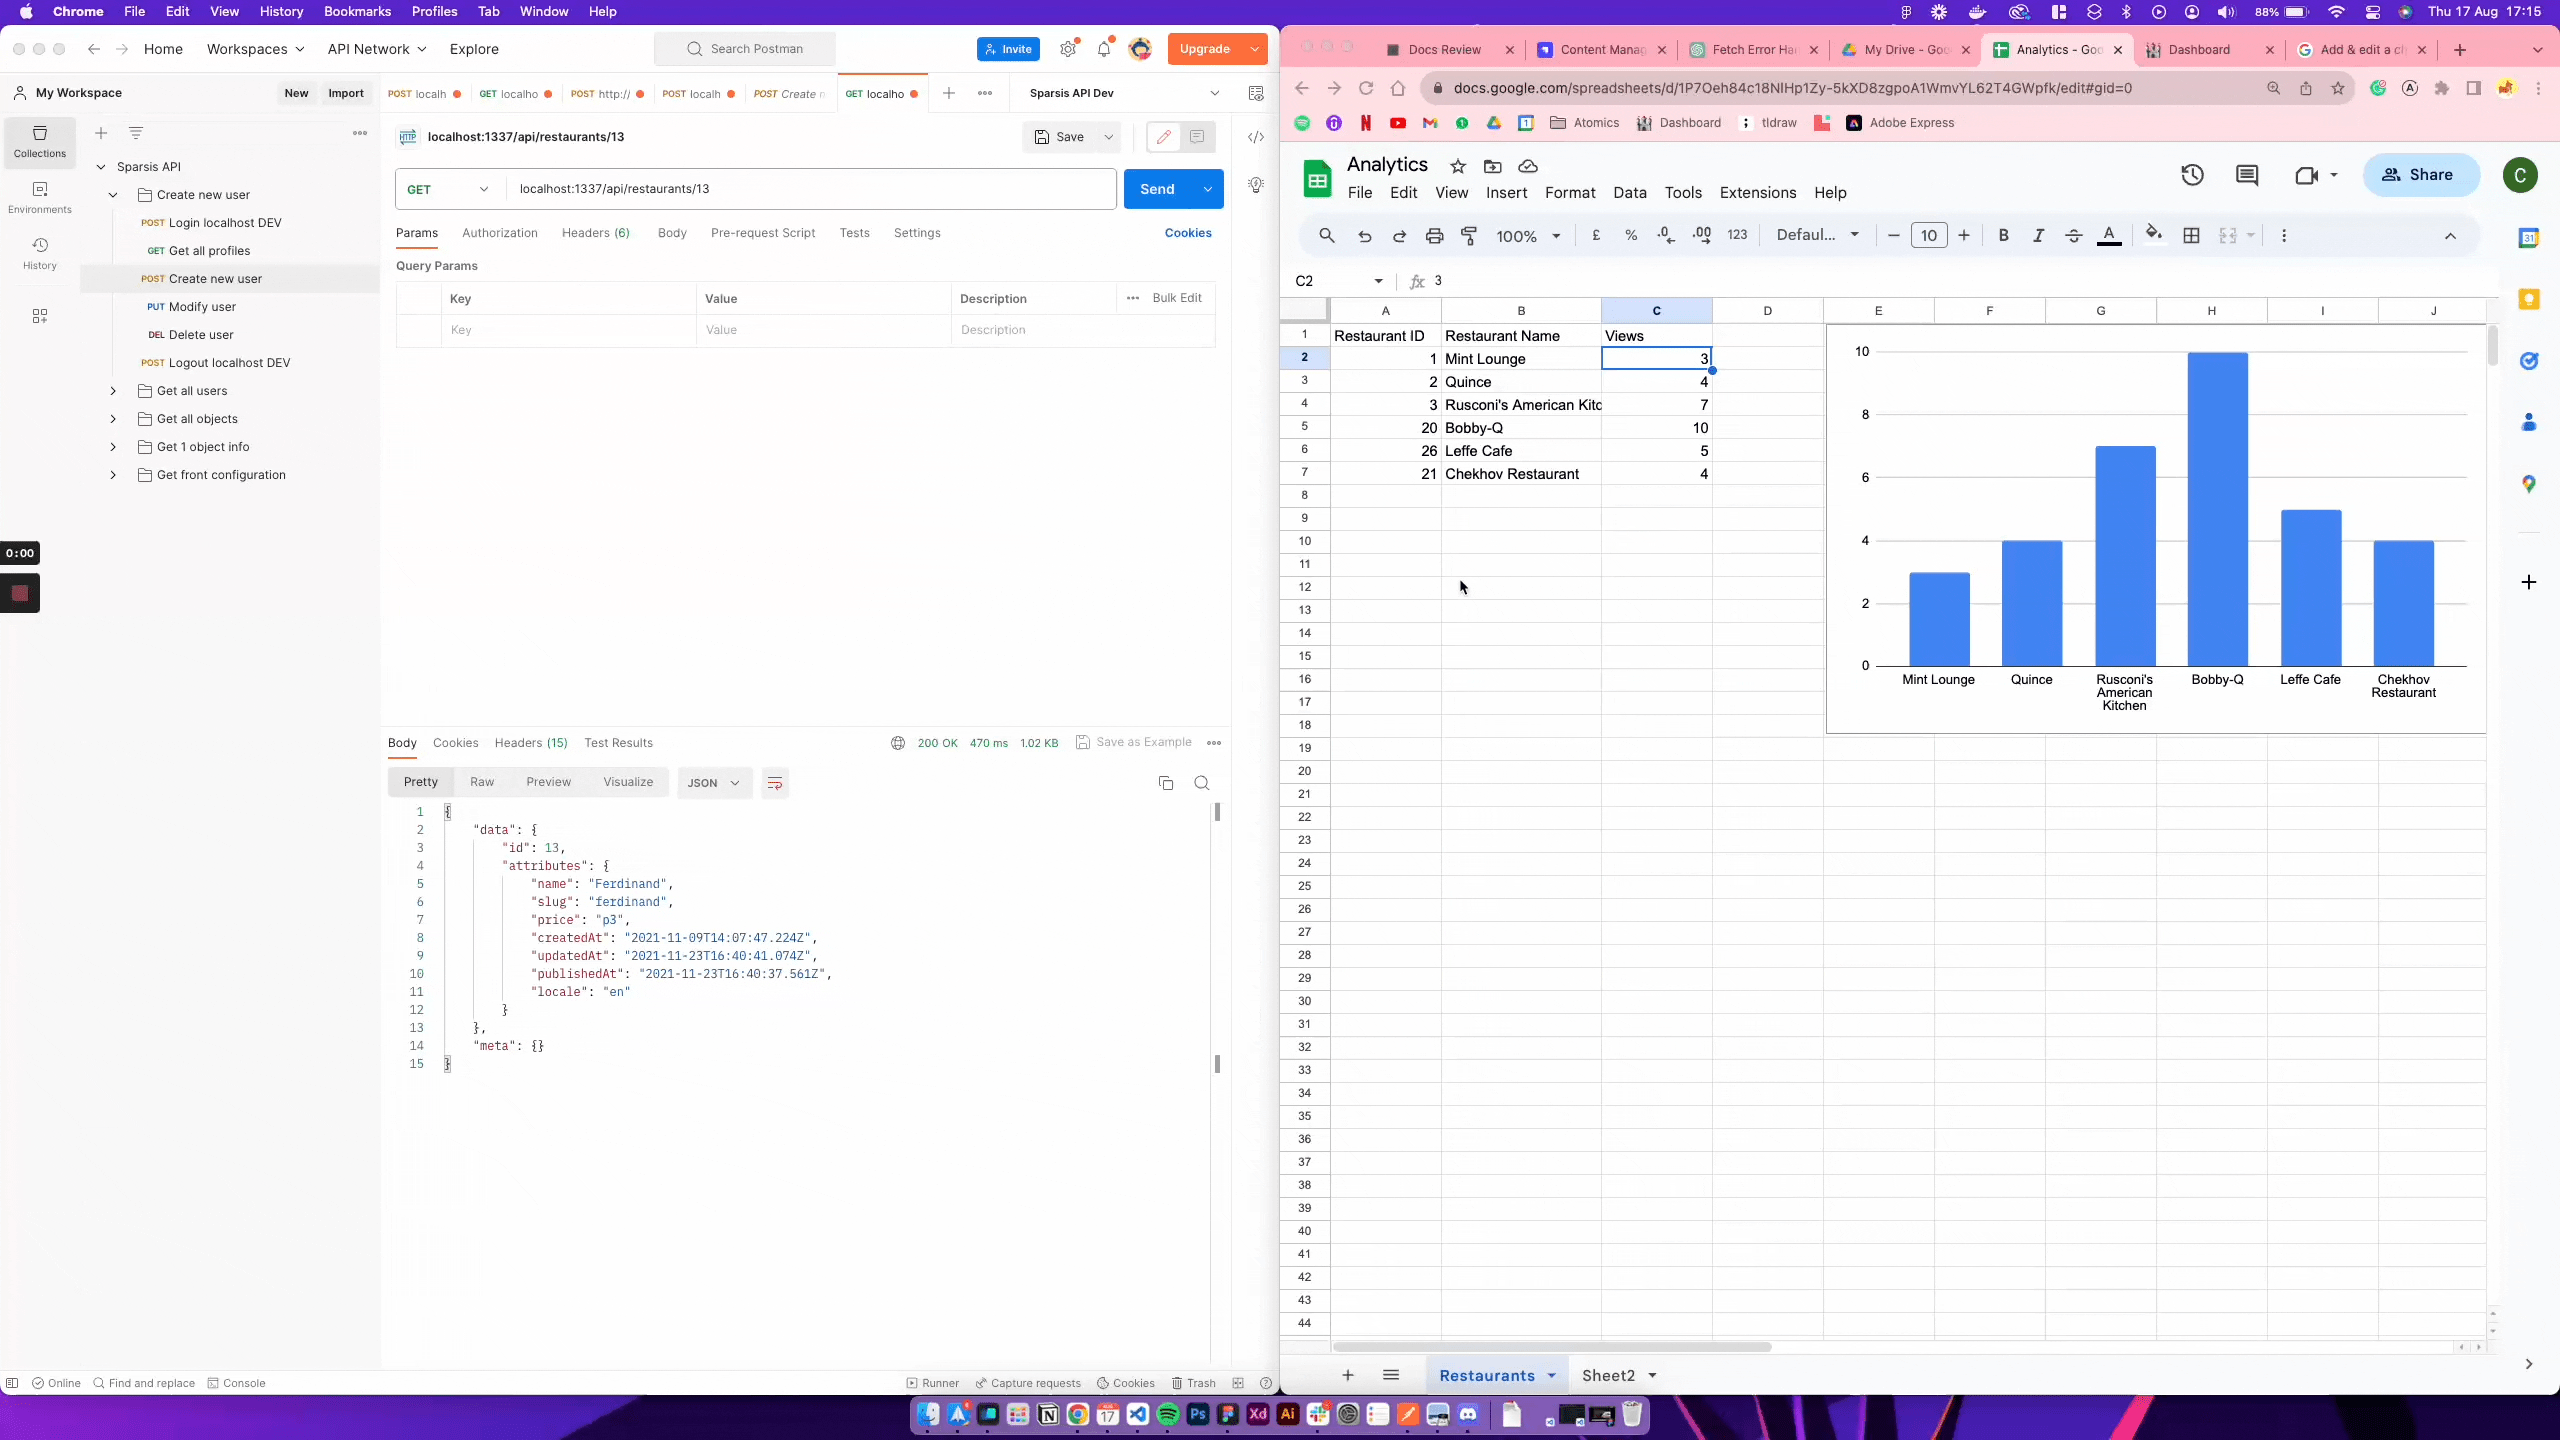 Visiting a restaurant page updates the Google Sheets spreadsheet